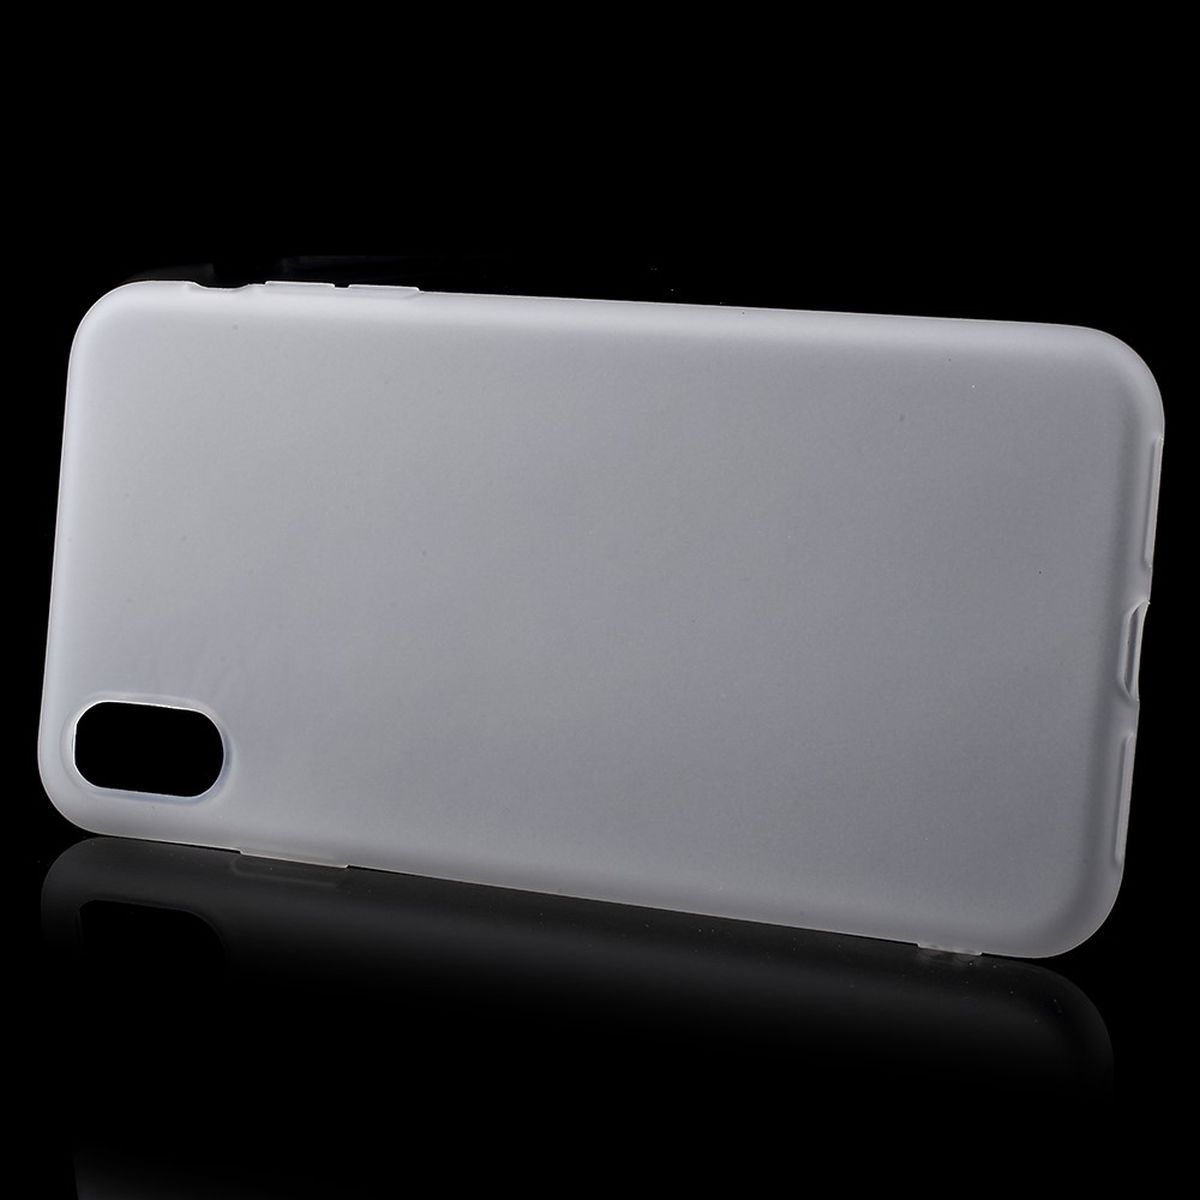 Silikon, Apple, iPhone COVERKINGZ Xs Weiß Handycase Backcover, aus Max,